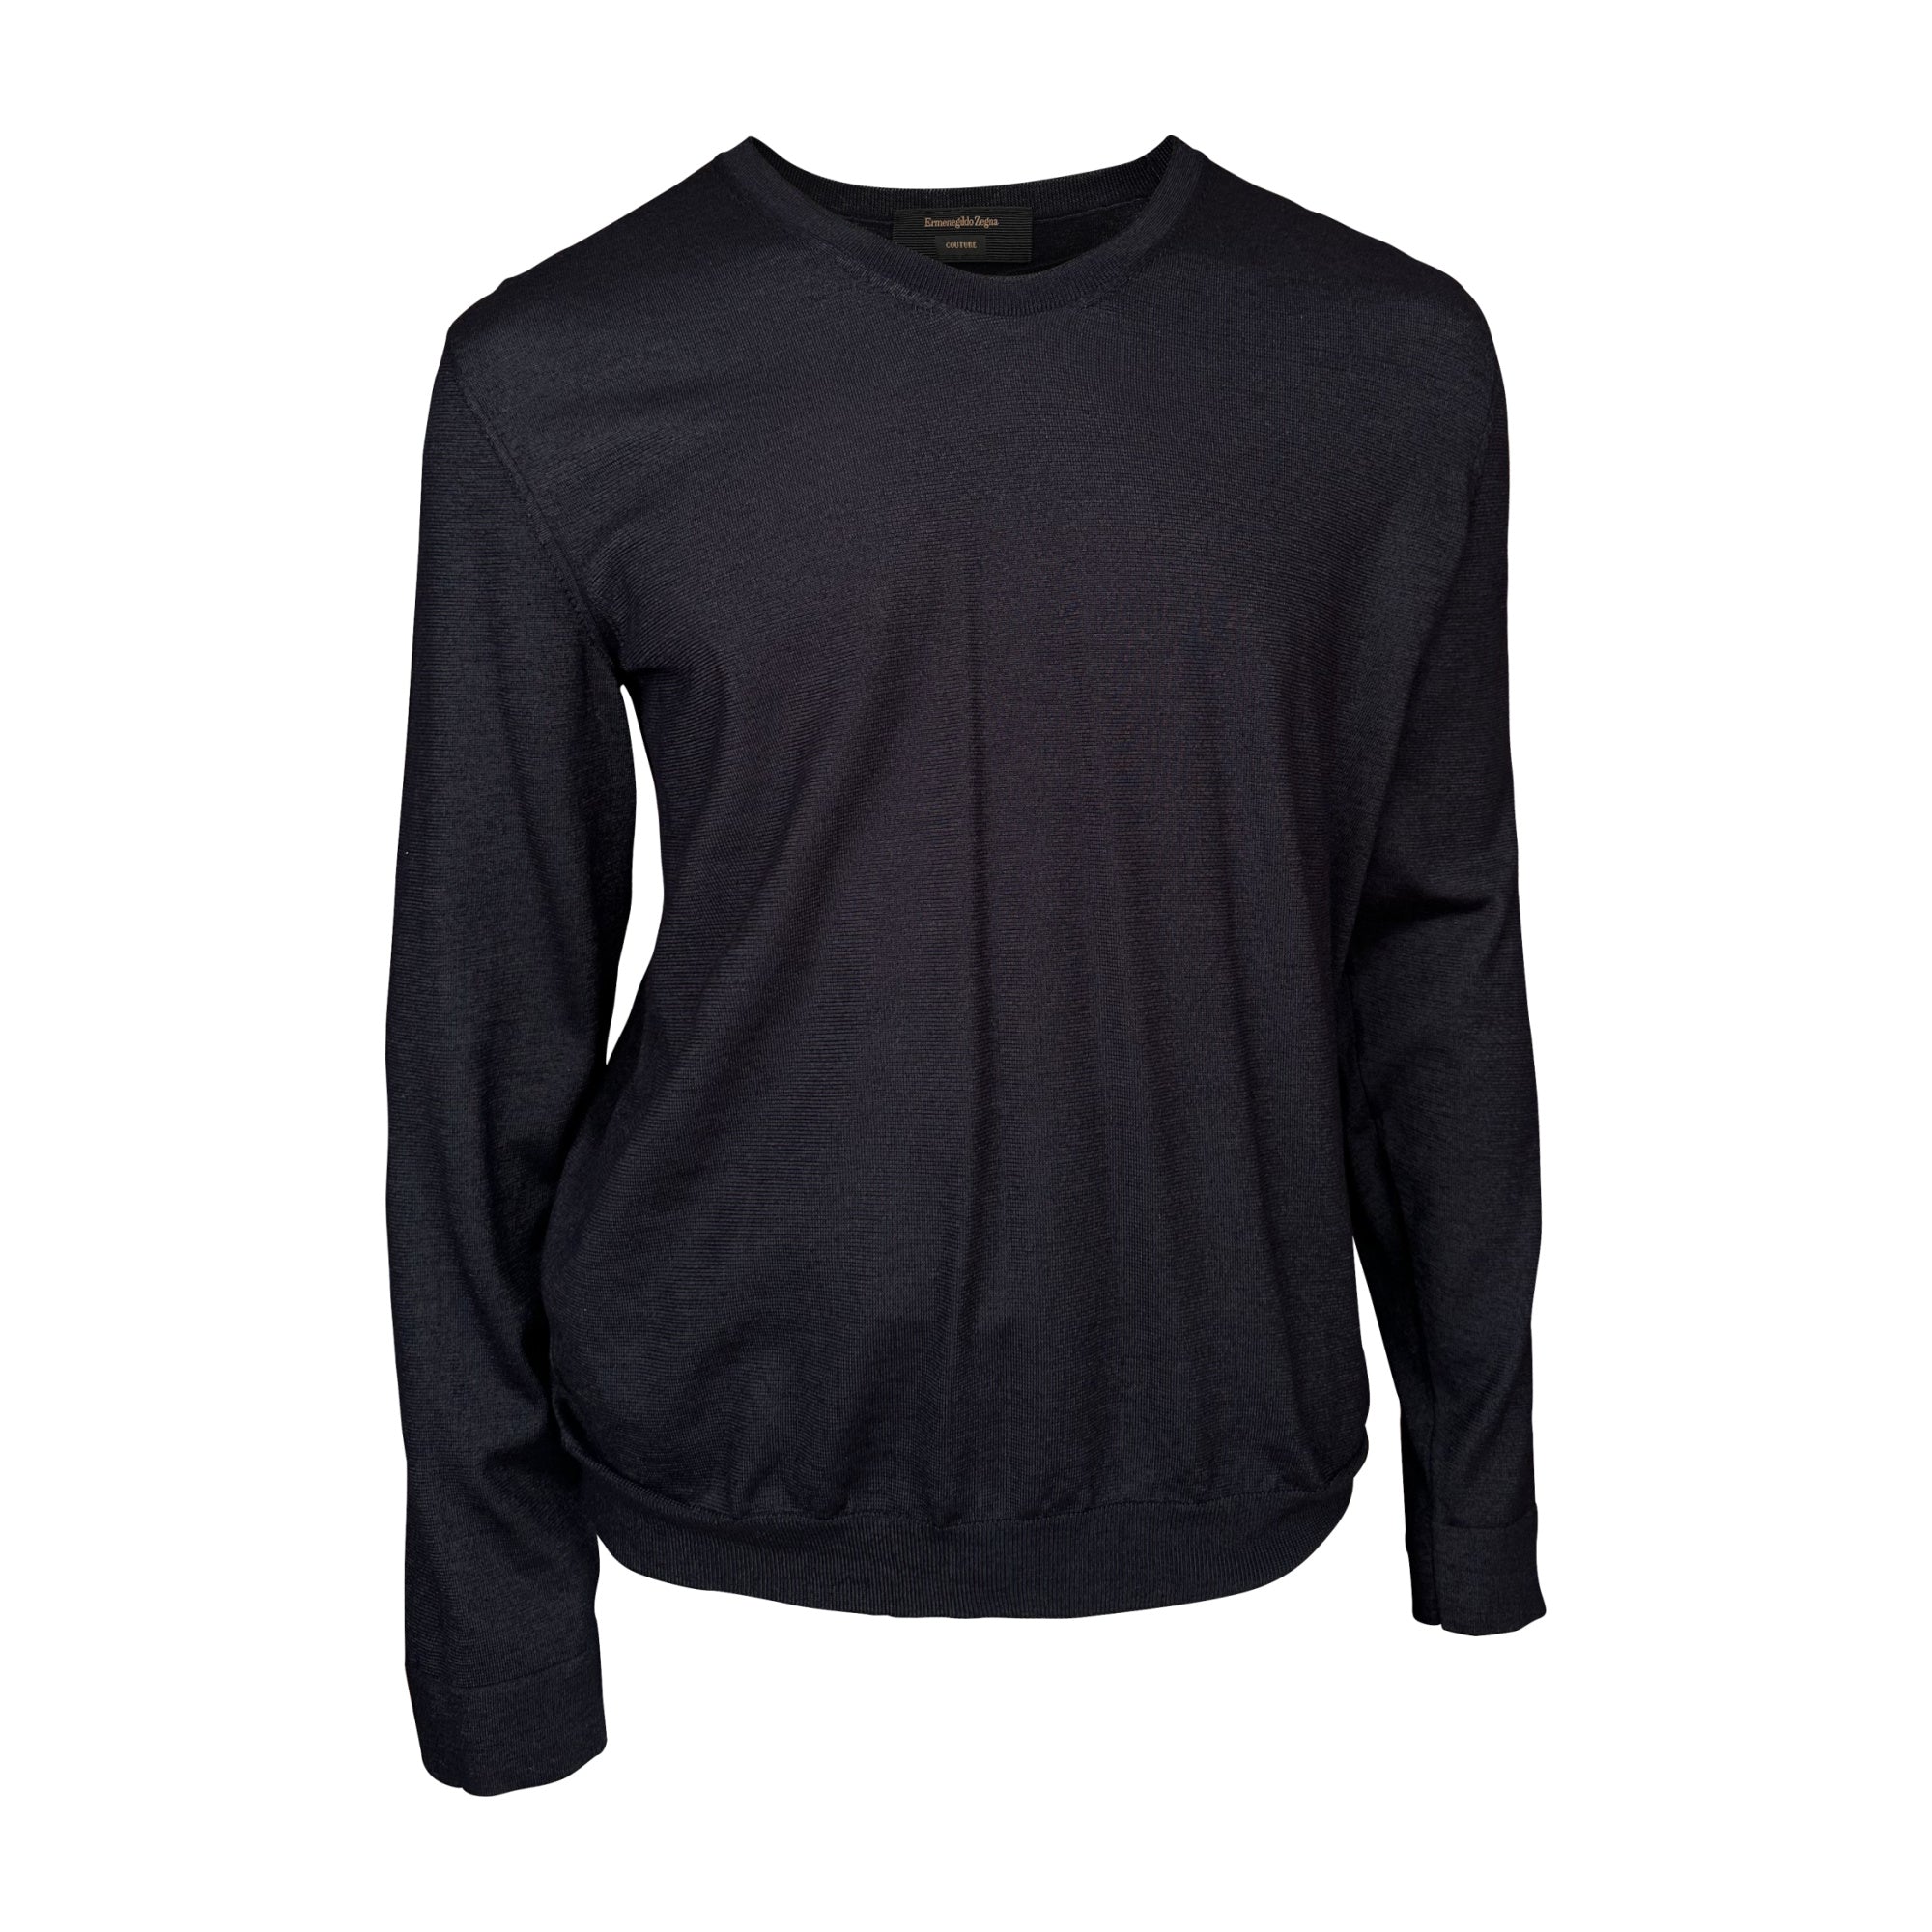 Zegna Couture Sweater - 24/7 Clothing